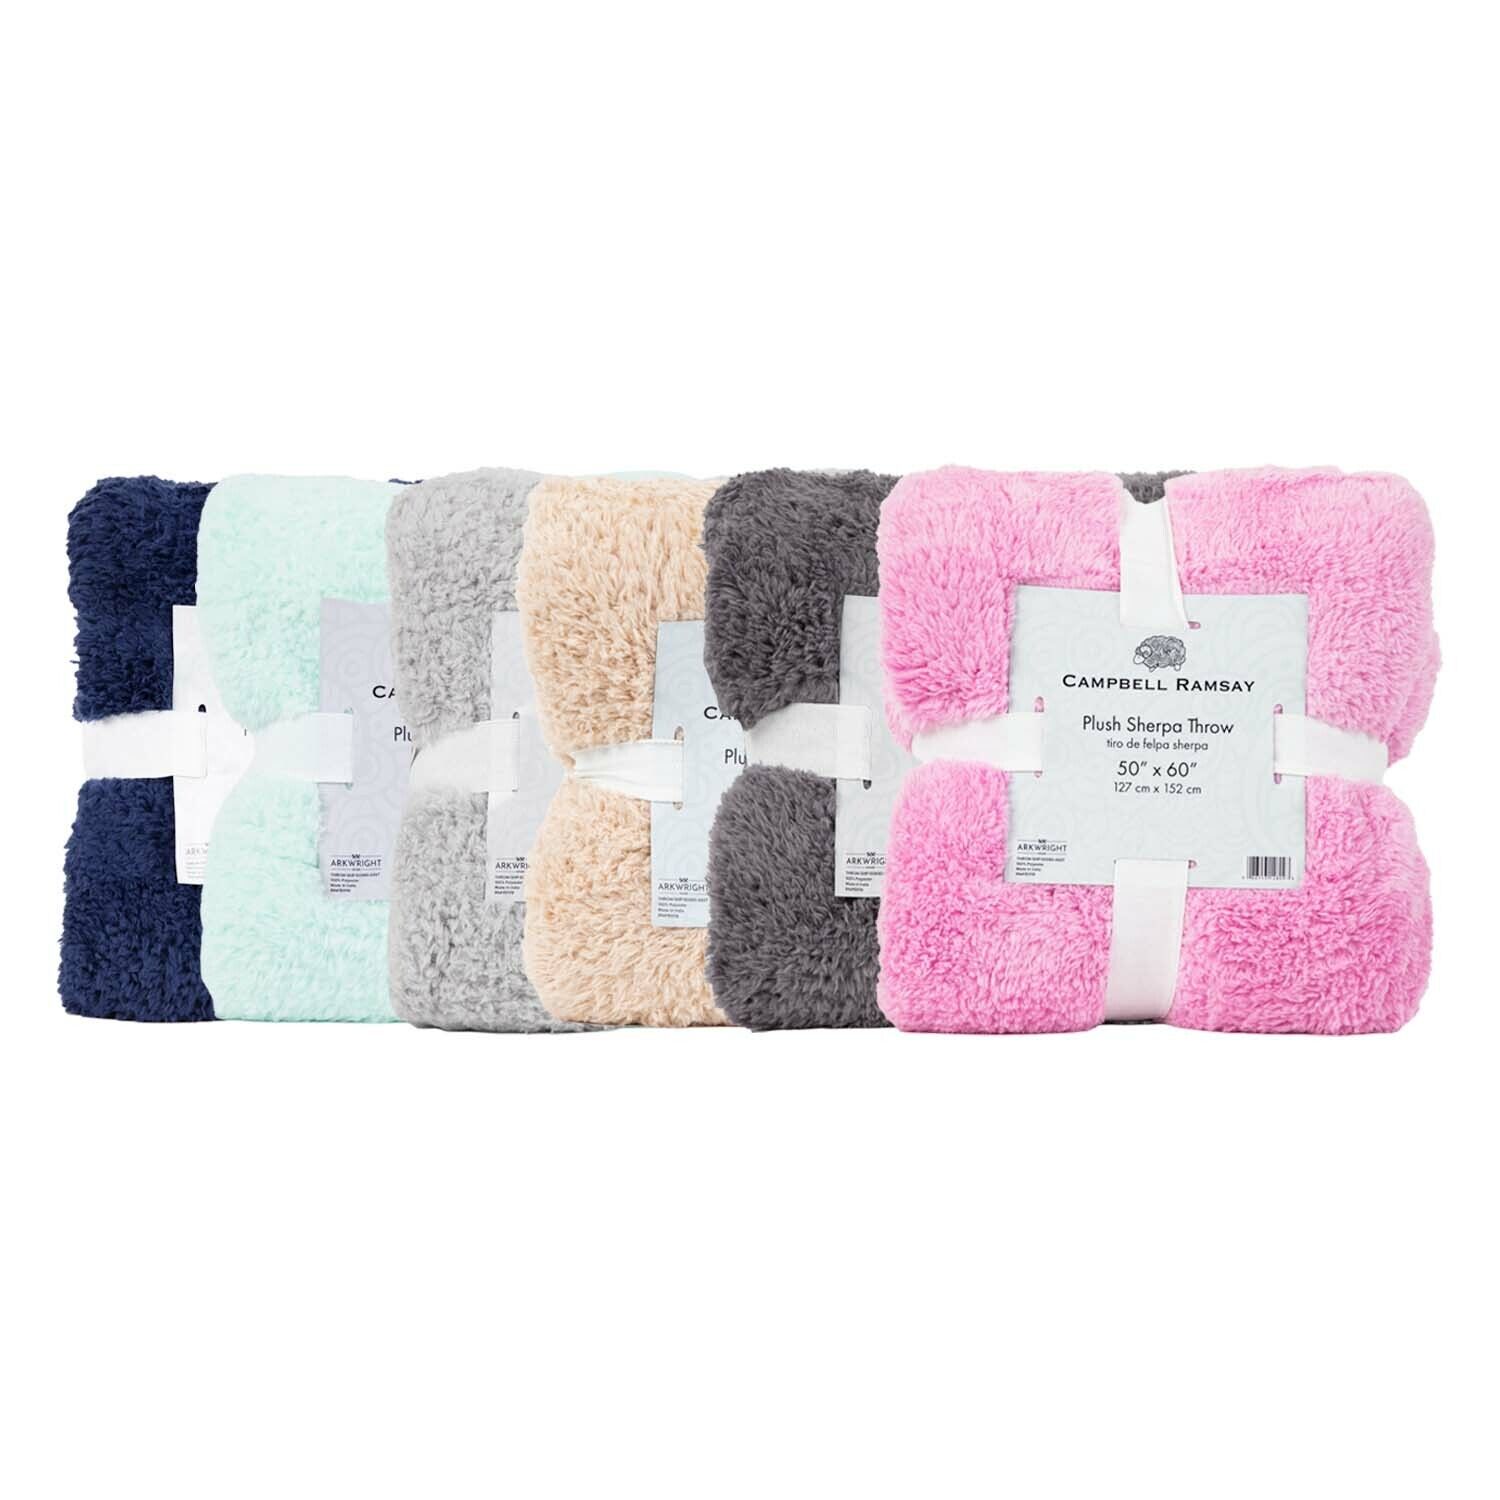 12 Pack of Plush Sherpa Throw Blankets, 50x60, 6 Solid Colors (2 of Each), Soft Campbell Ramsay Does Not Apply - фотография #2